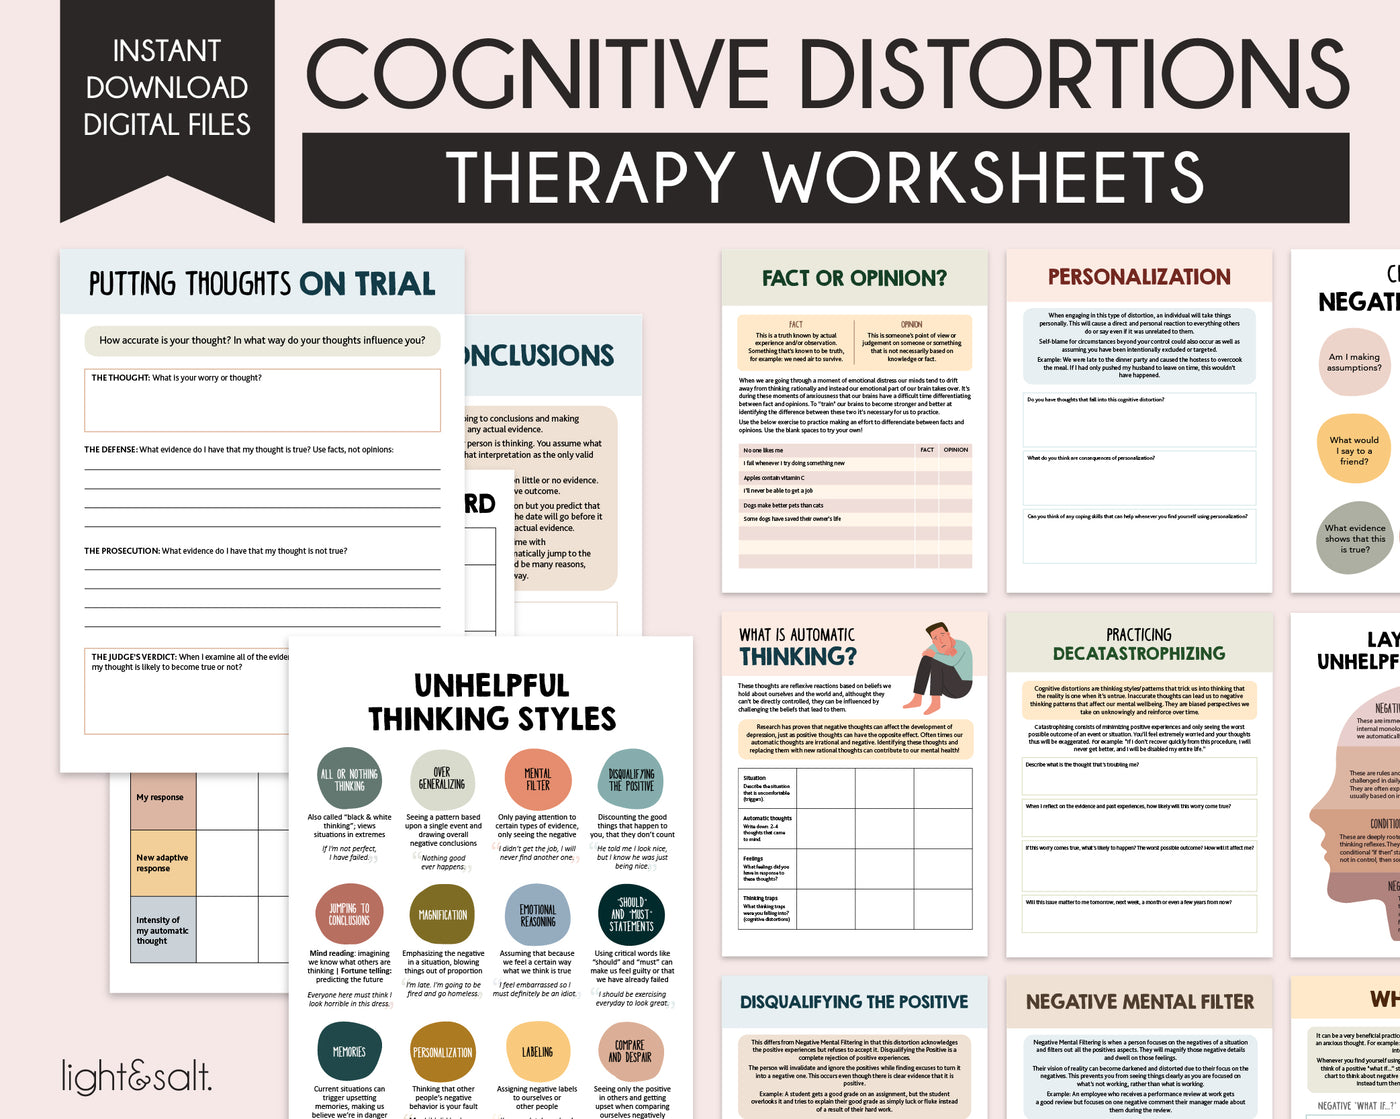 Cognitive distortions worksheets, unhelpful thinking styles